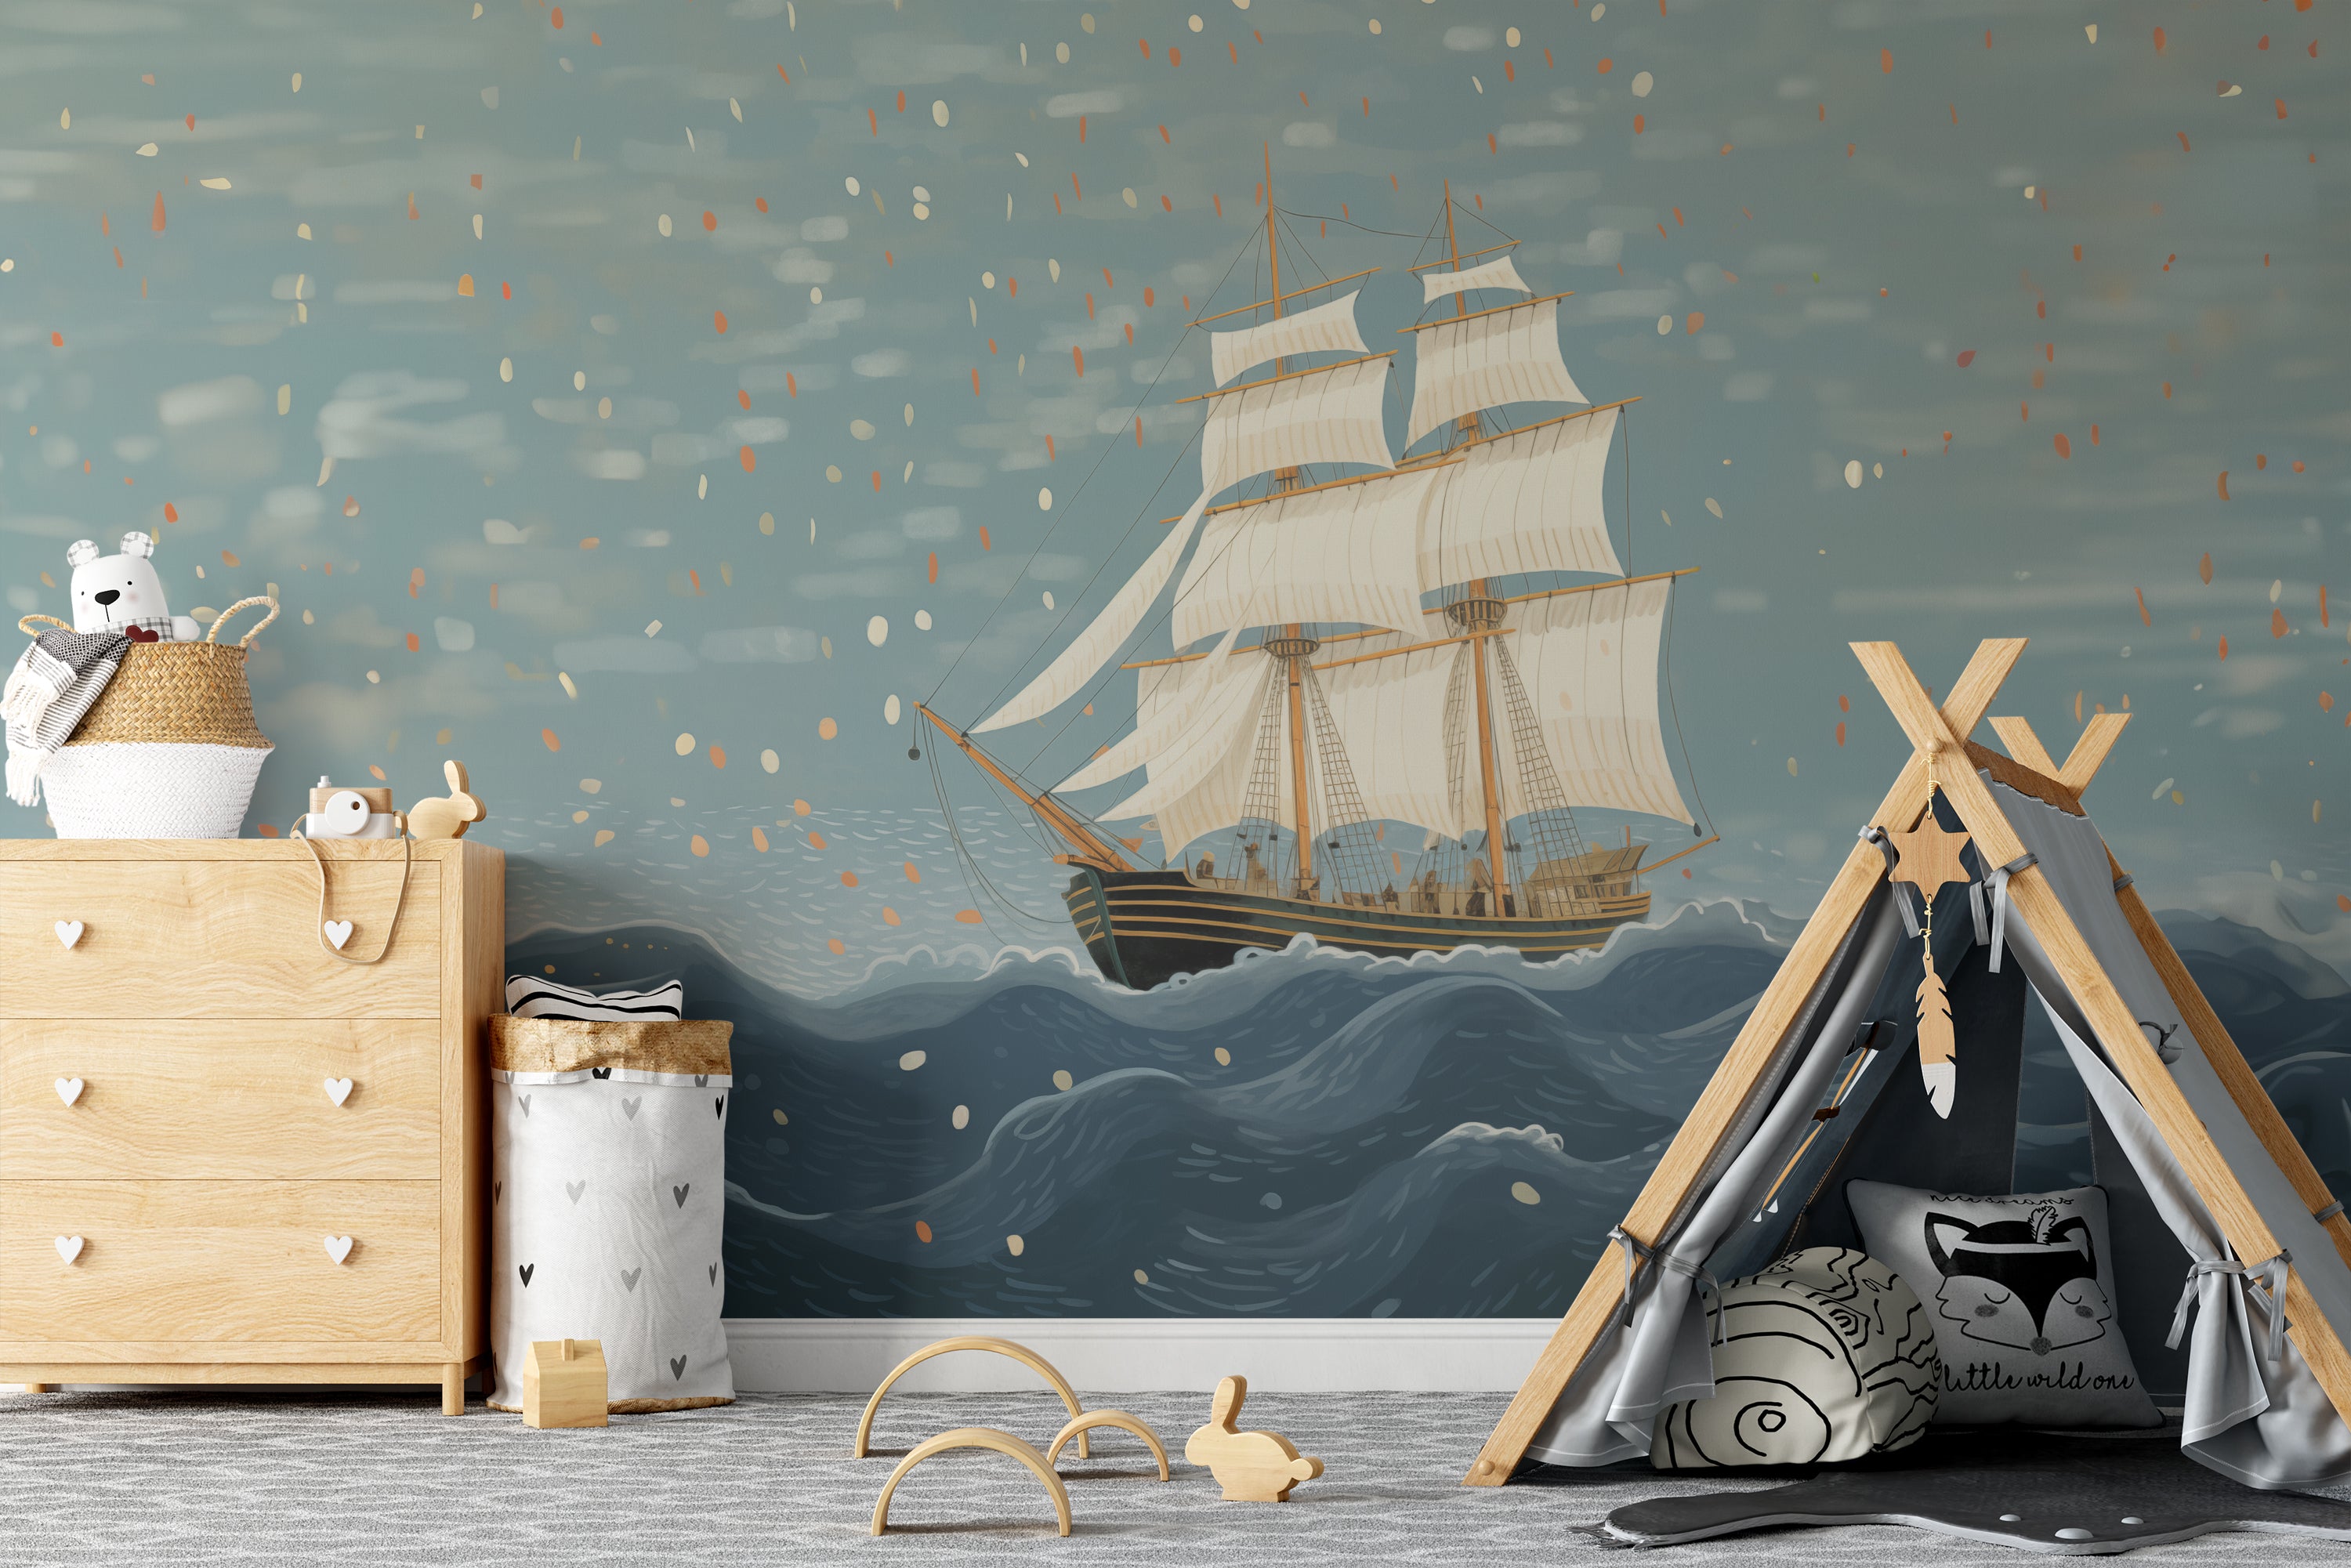 Child's bedroom with nautical theme featuring a ship sailing mural on the wall, a tent play area, and wooden toys.